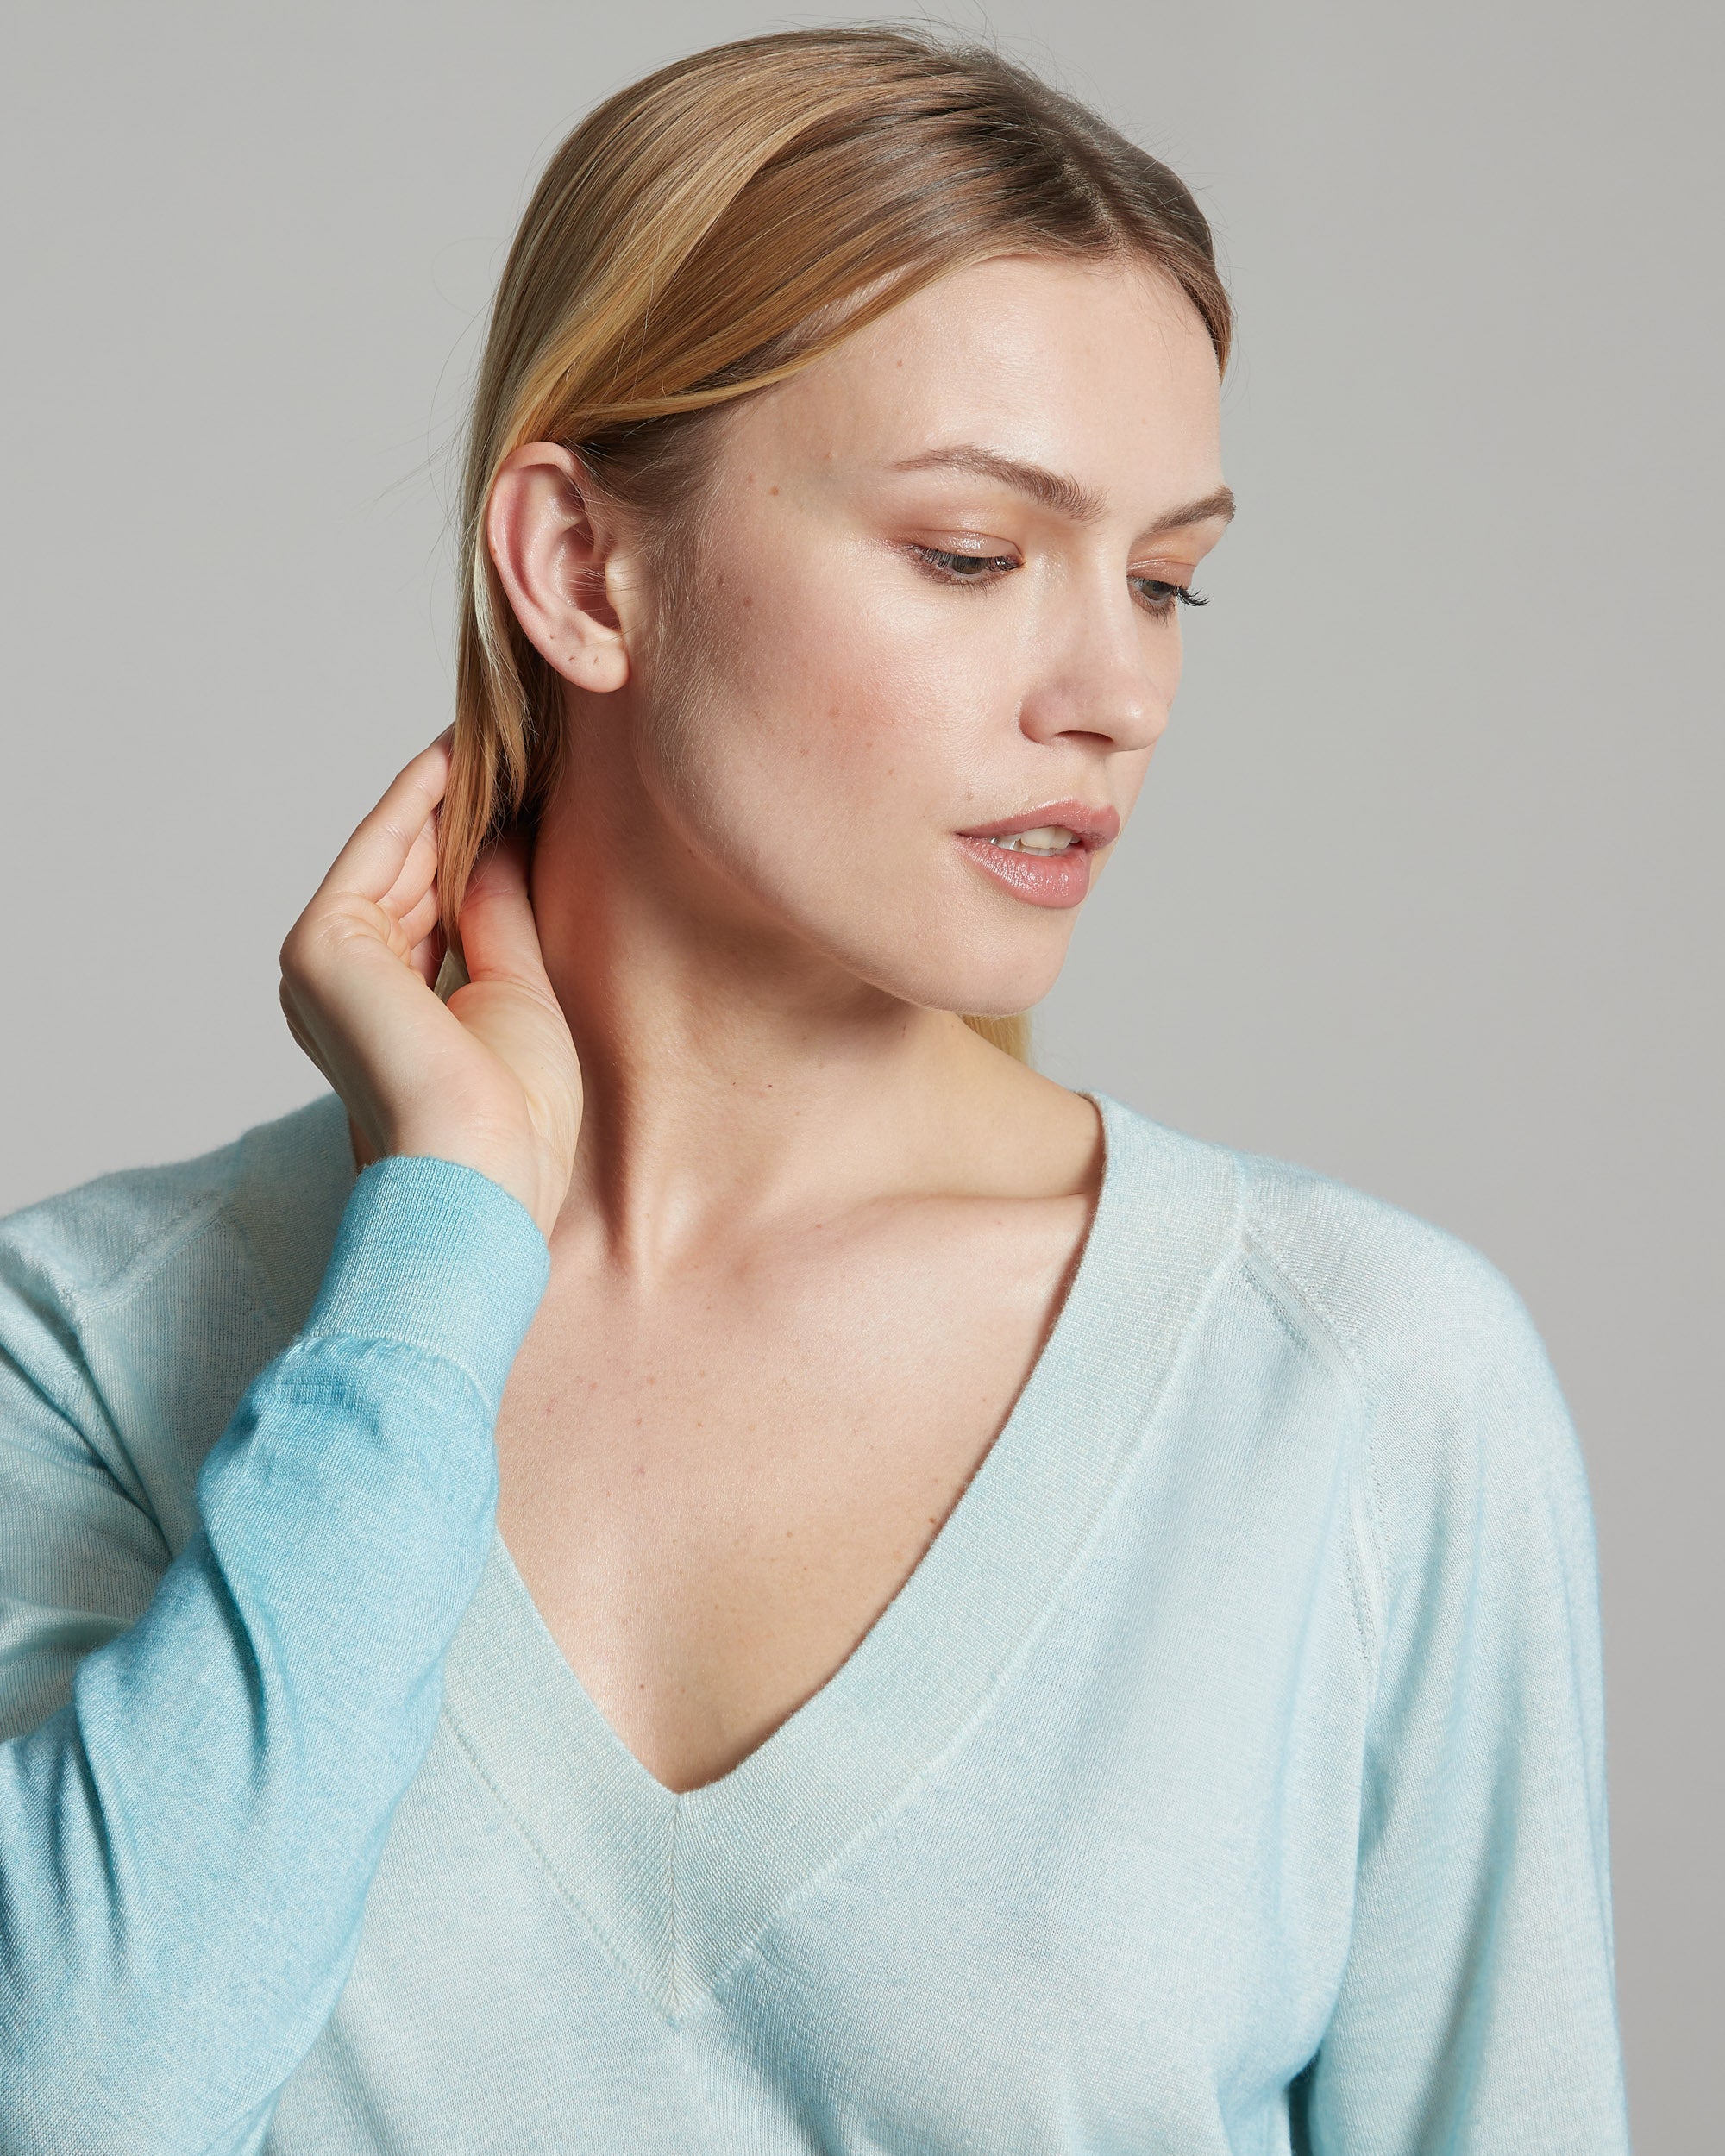 Cashmere and silk hand-sprayed V neck sweater in green